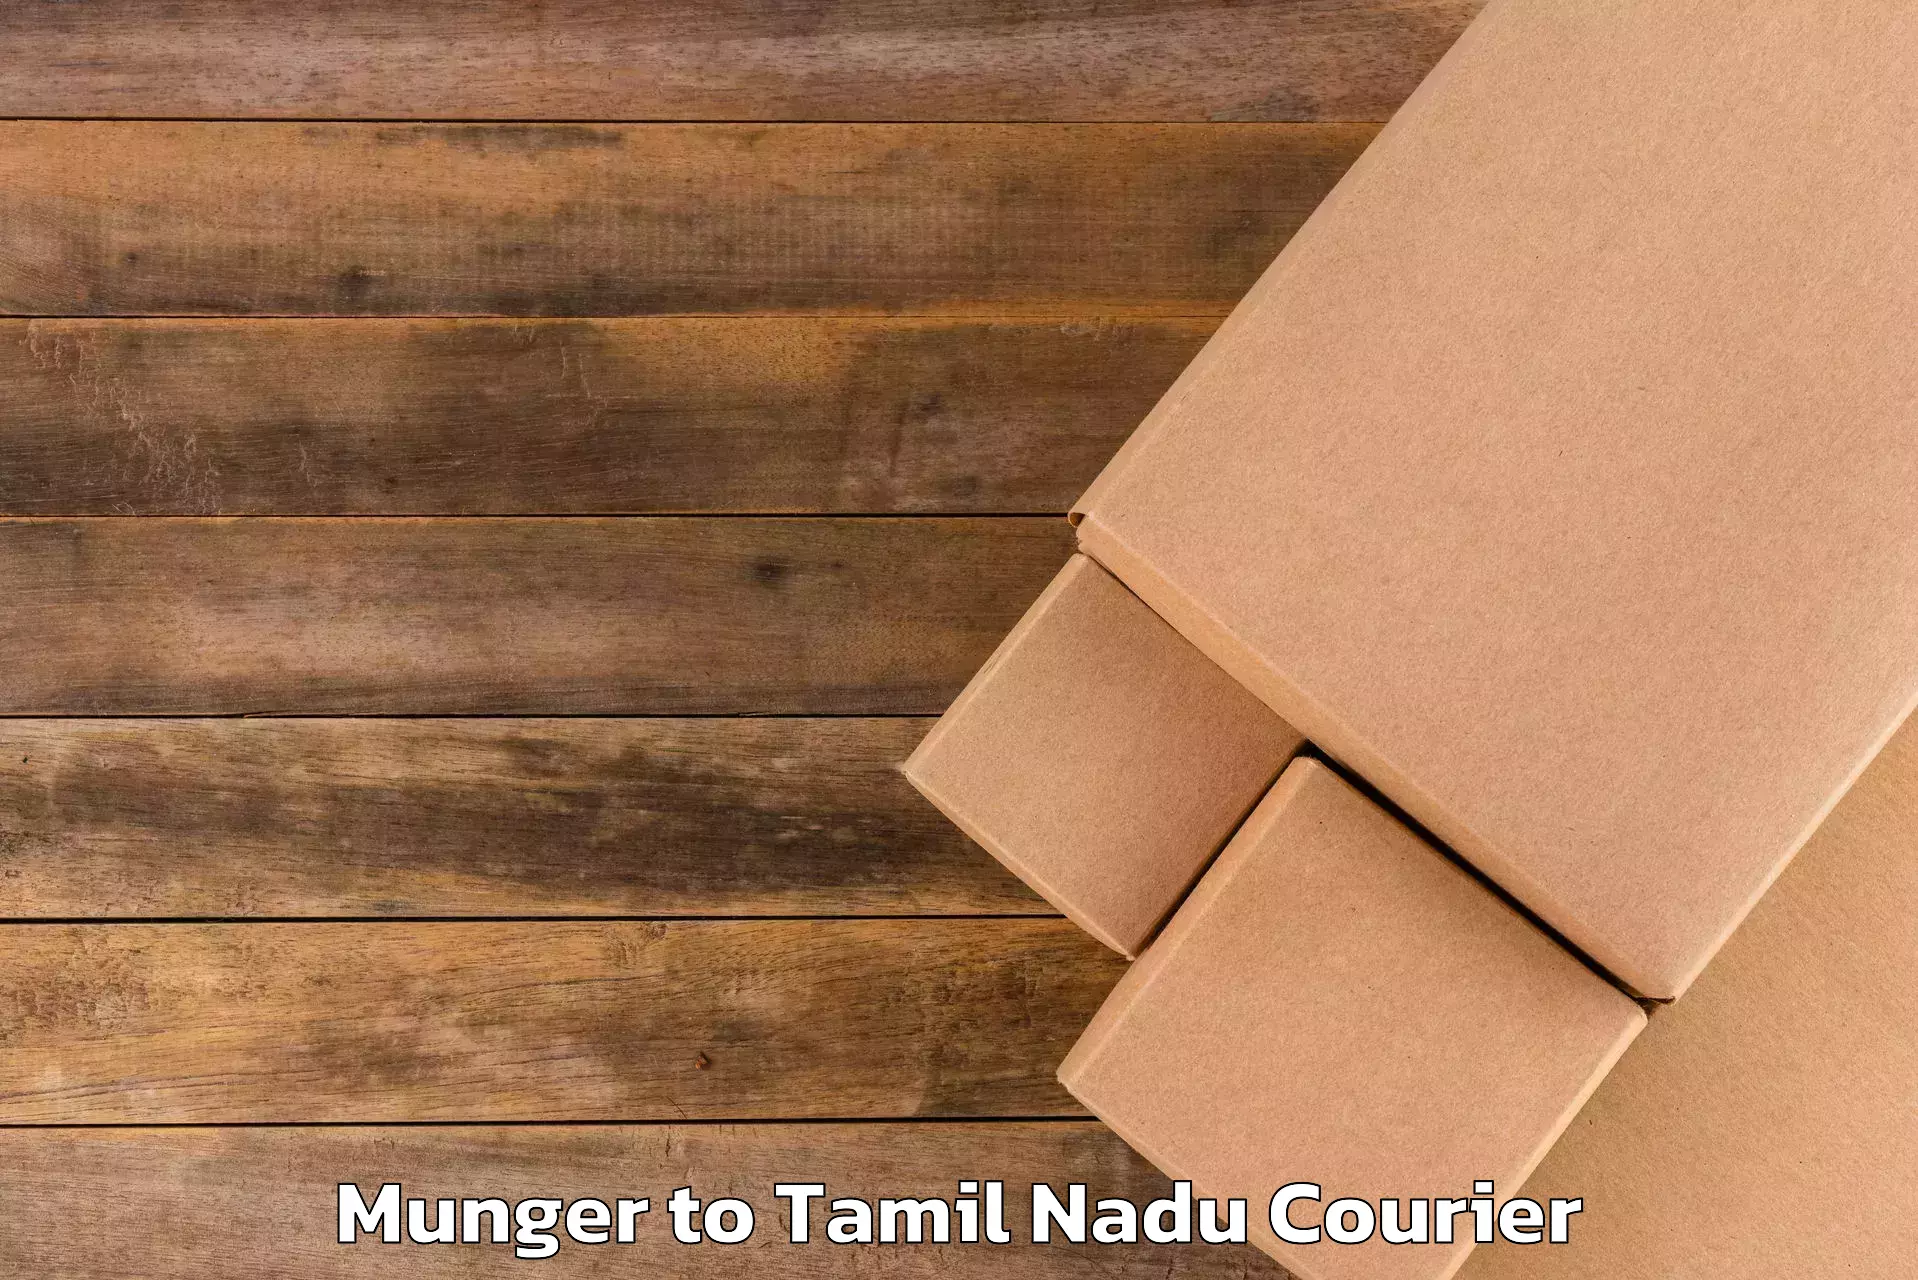 Luggage transport consulting Munger to Tamil Nadu